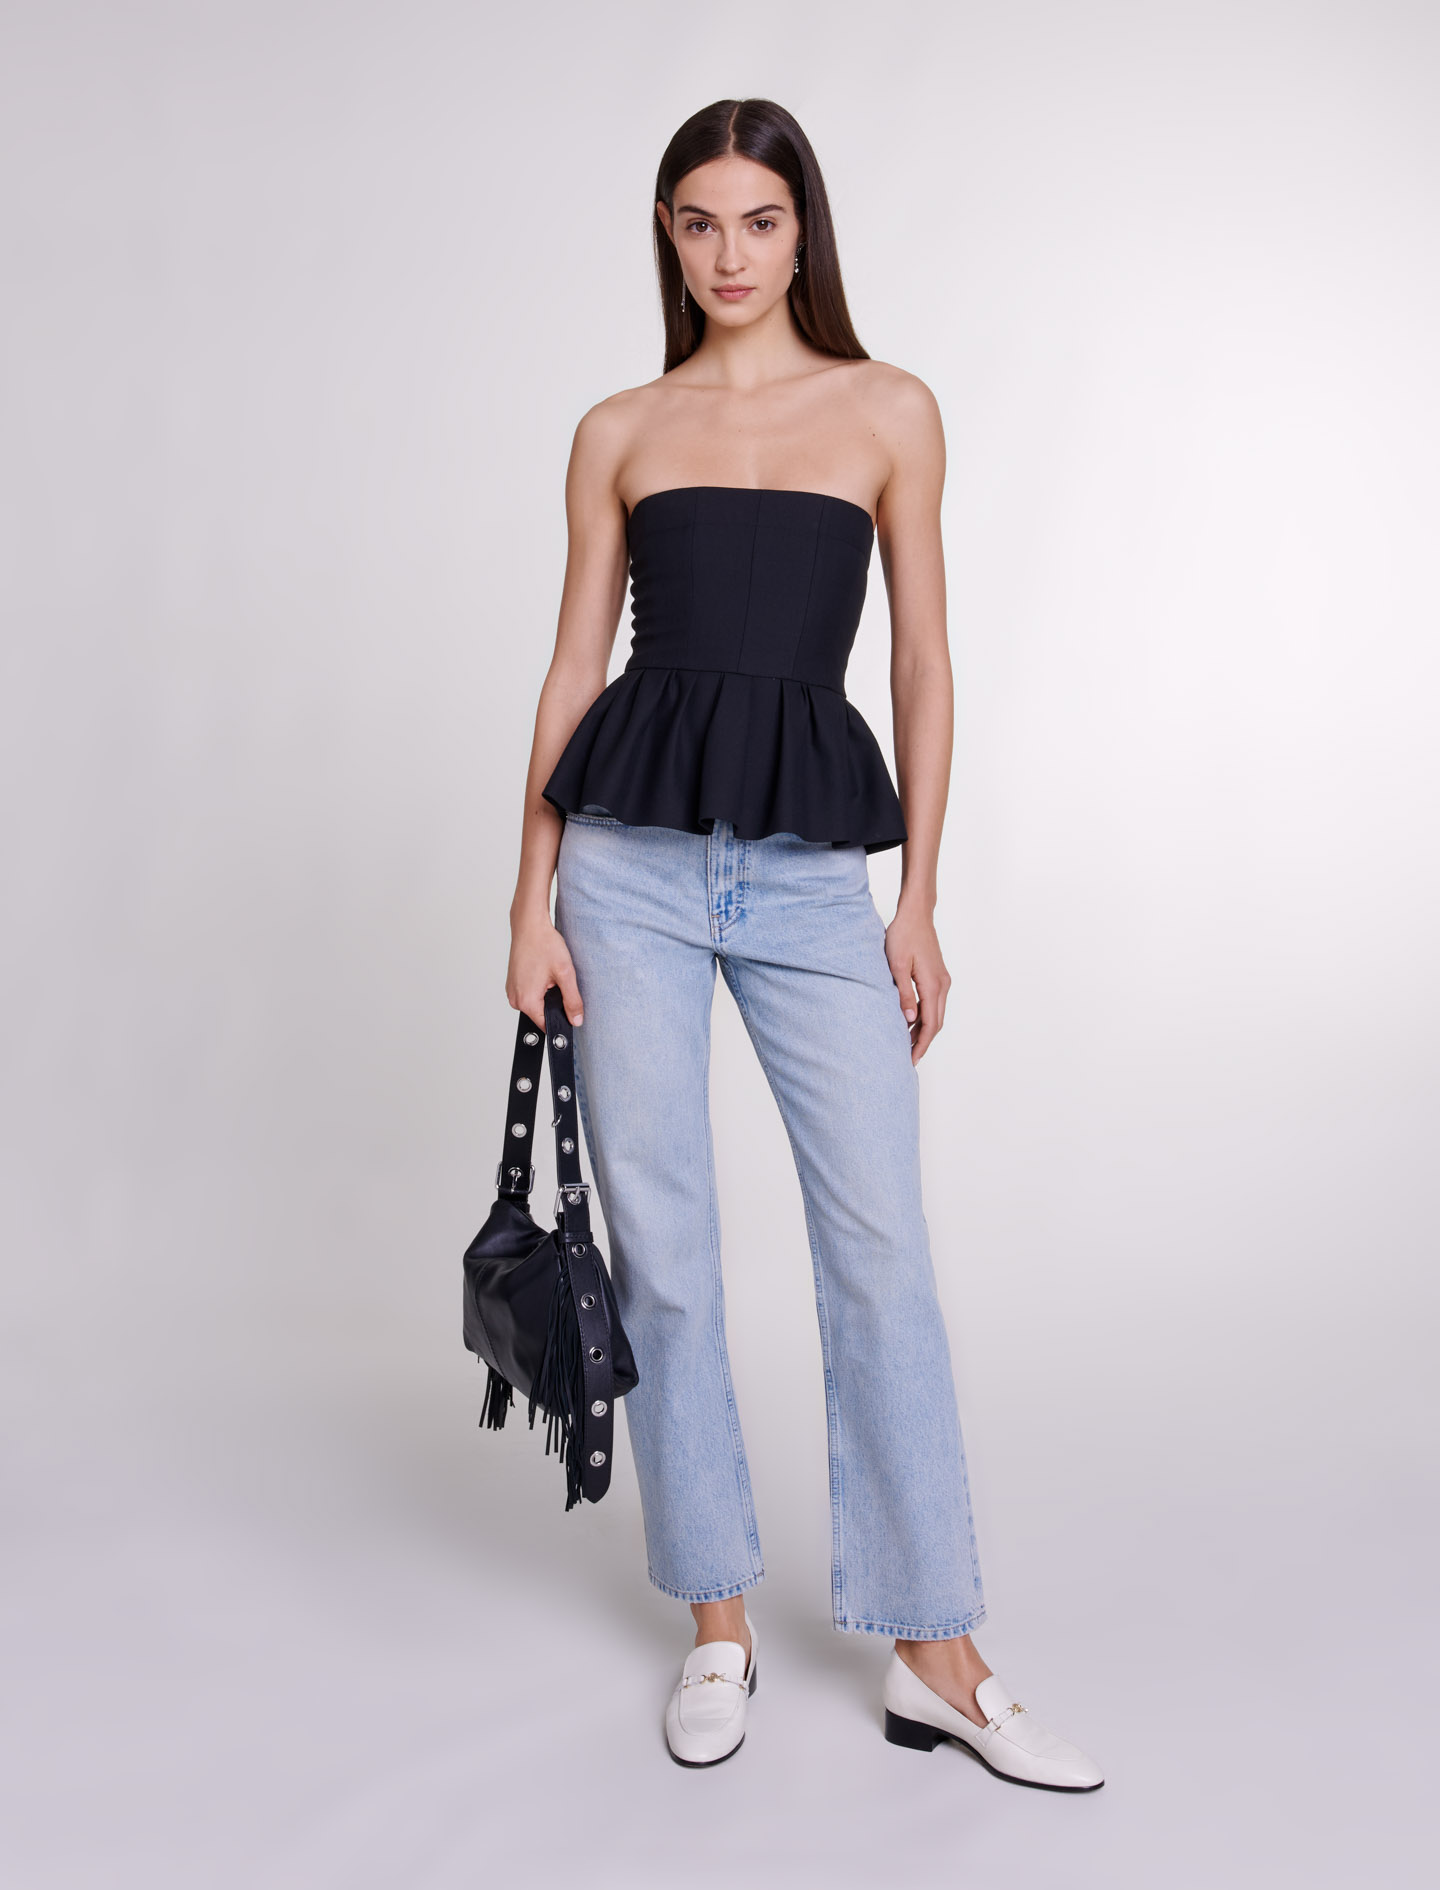 Mixte's polyester, Bustier top with basque for Spring/Summer, size Mixte-Tops & Shirts-US L / FR 3, in color Black / Black